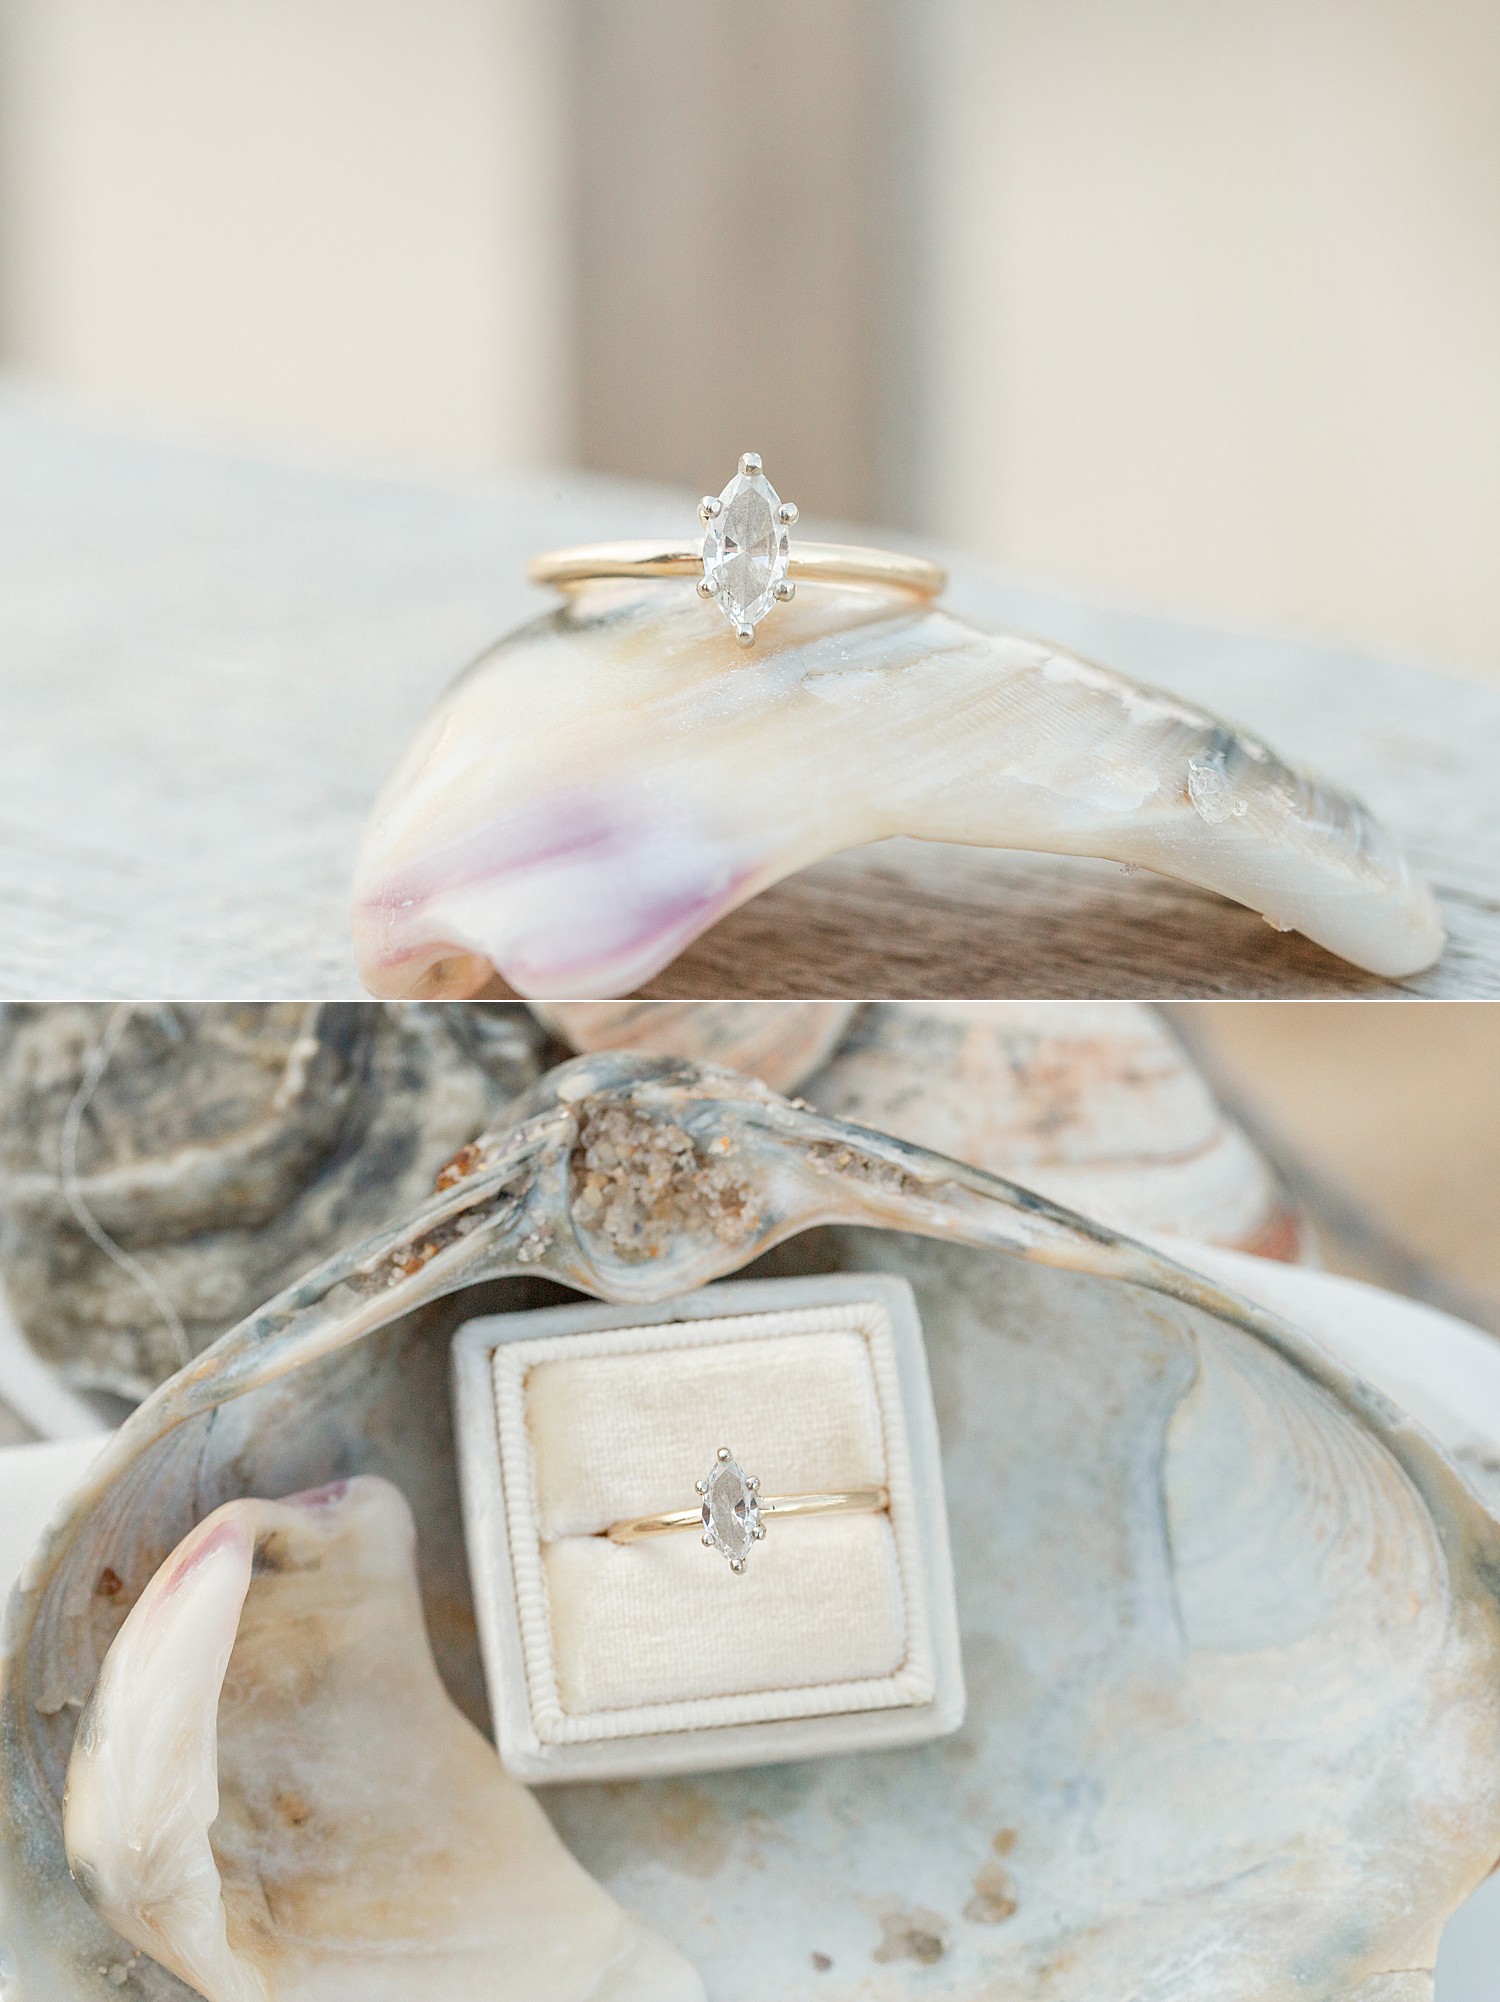 Engagement ring close up during Bayhead Yacht Club + Beach engagement session